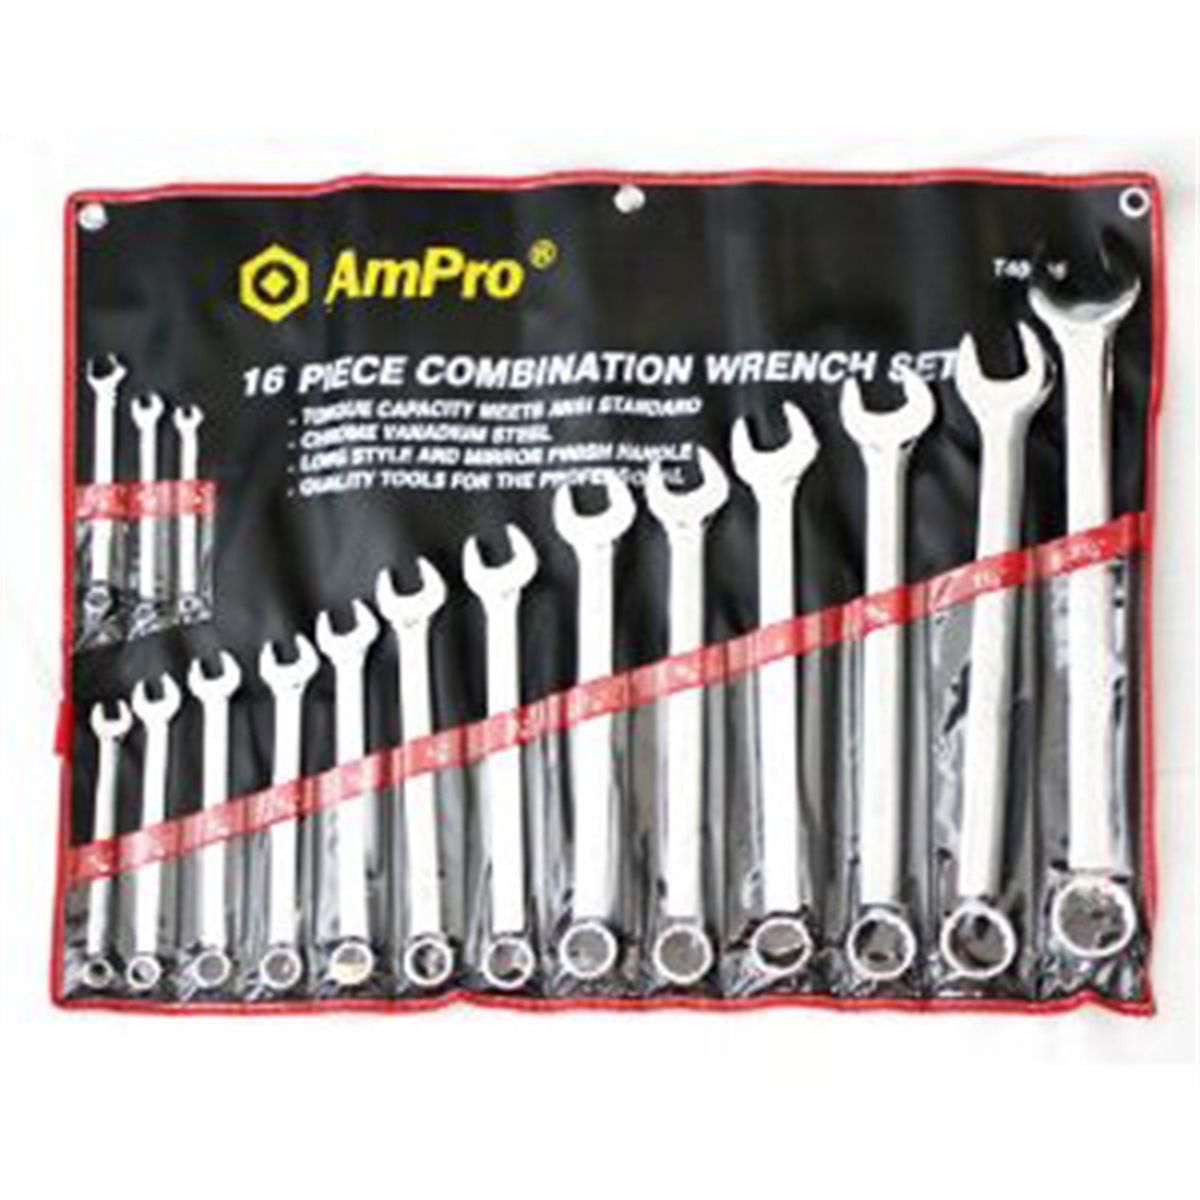 16 Pc Combination Wrench Set